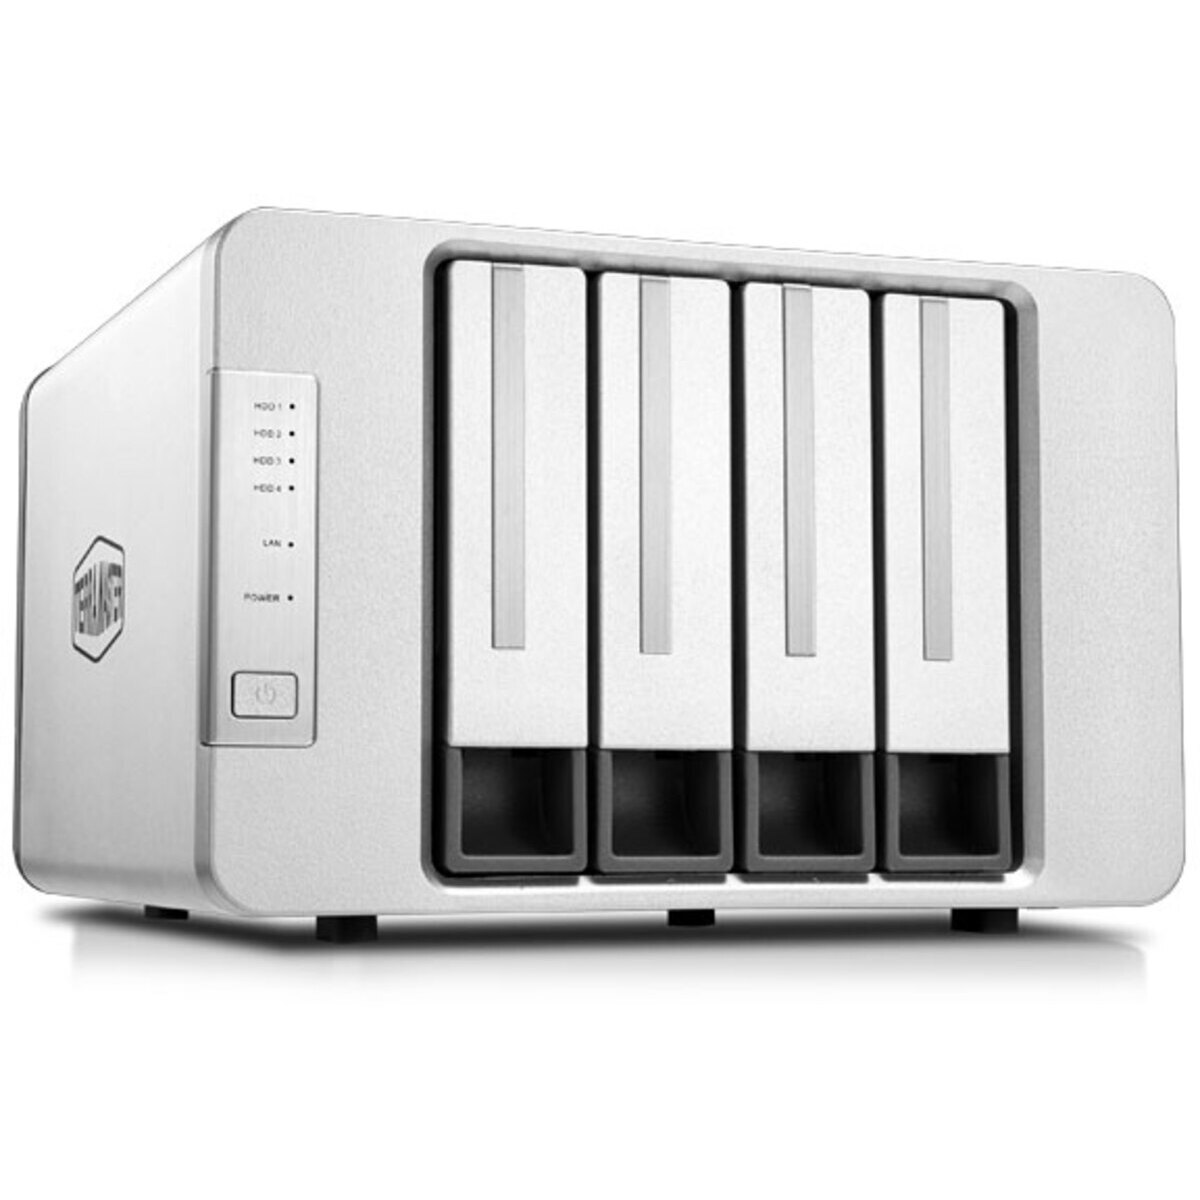 TerraMaster F4-223 24tb 4-Bay Desktop Personal / Basic Home / Small Office NAS - Network Attached Storage Device 3x8tb Seagate BarraCuda ST8000DM004 3.5 5400rpm SATA 6Gb/s HDD CONSUMER Class Drives Installed - Burn-In Tested - FREE RAM UPGRADE F4-223